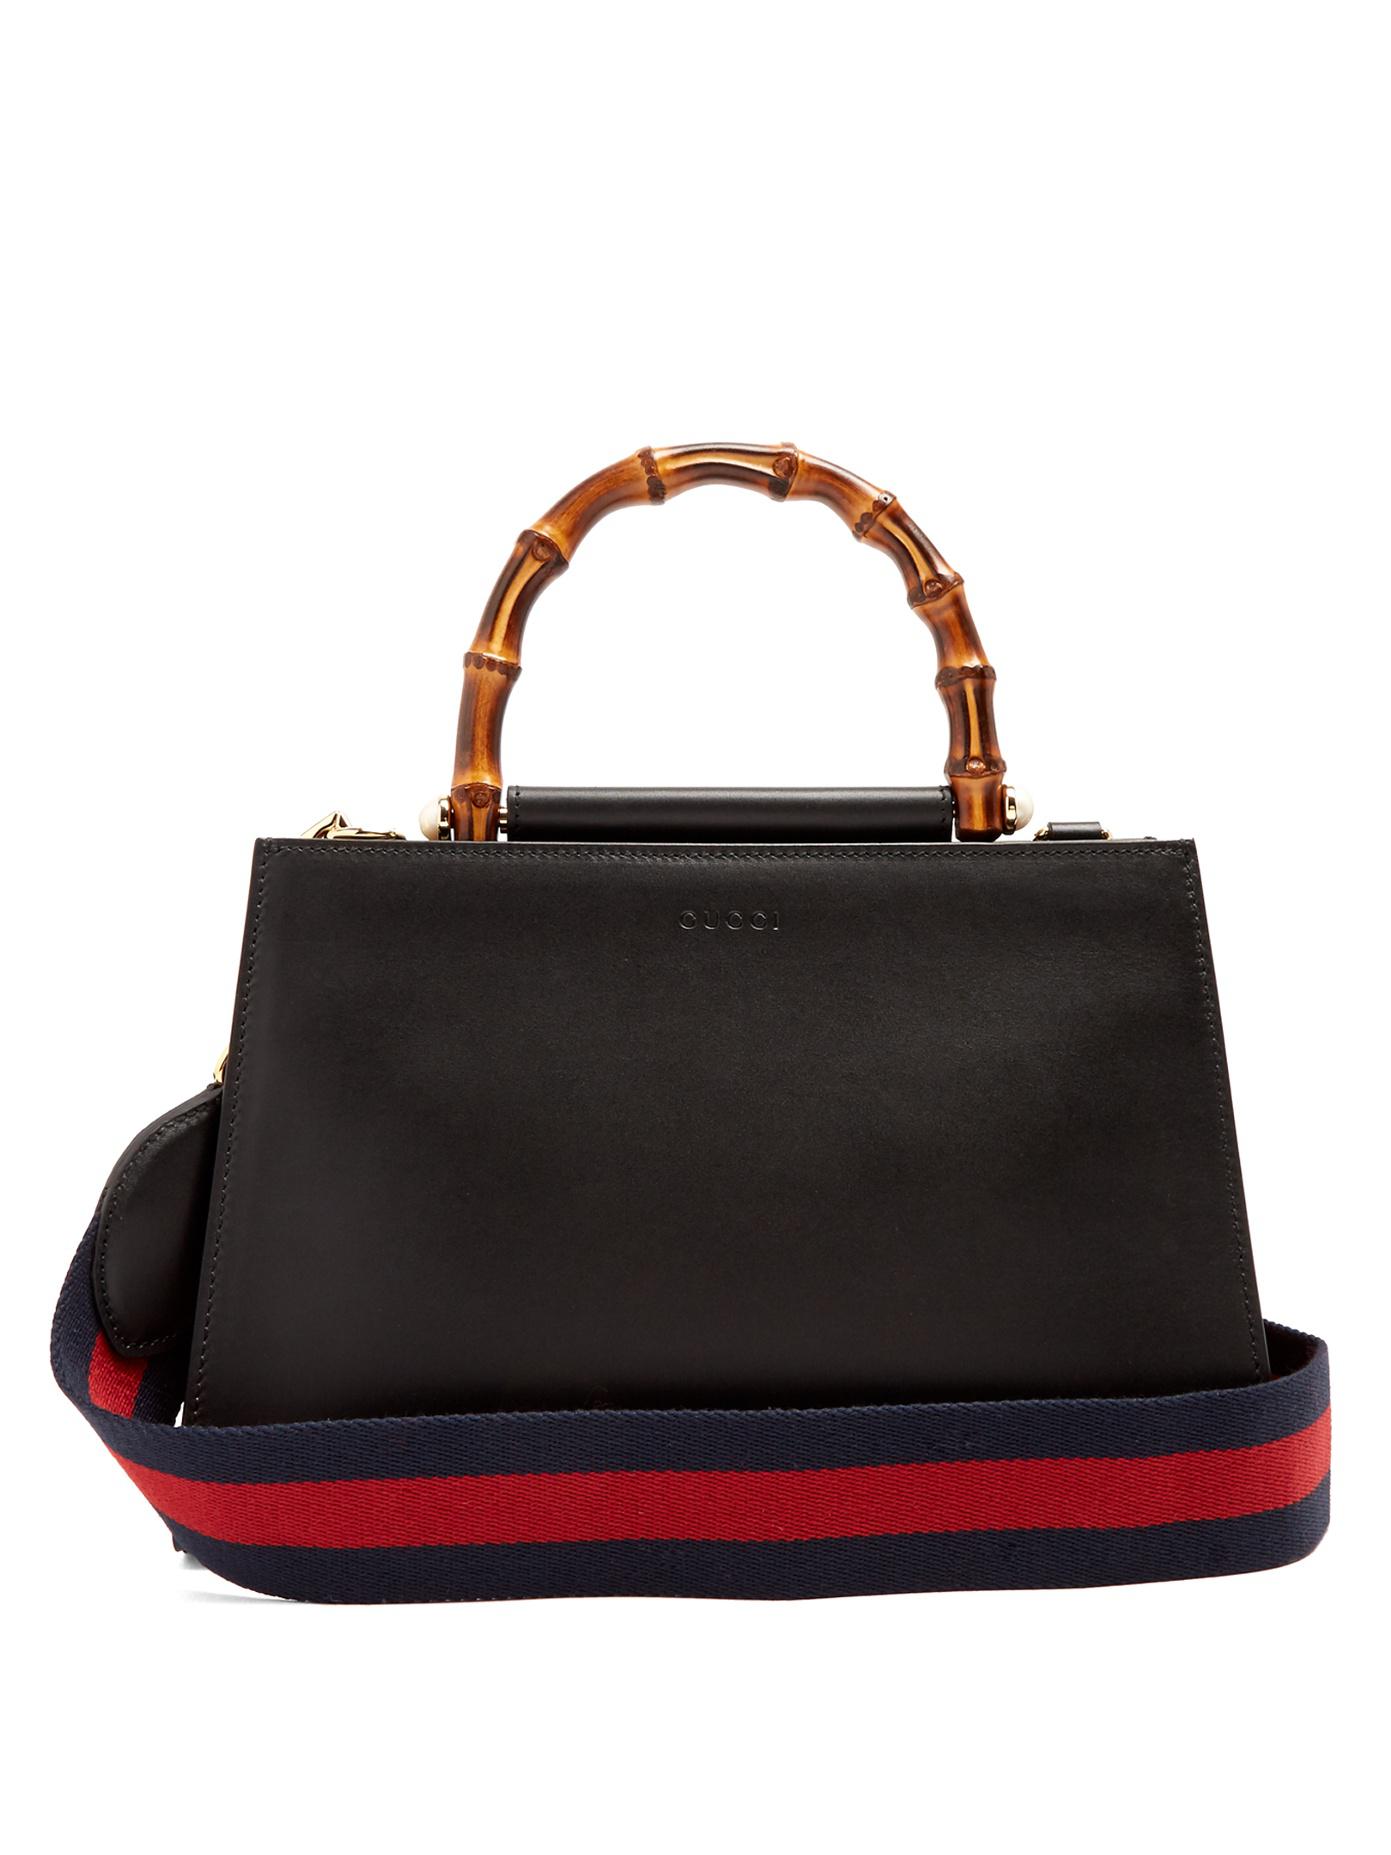 Gucci Nymphaea Bamboo-Handle Small Leather Tote in Black | Lyst